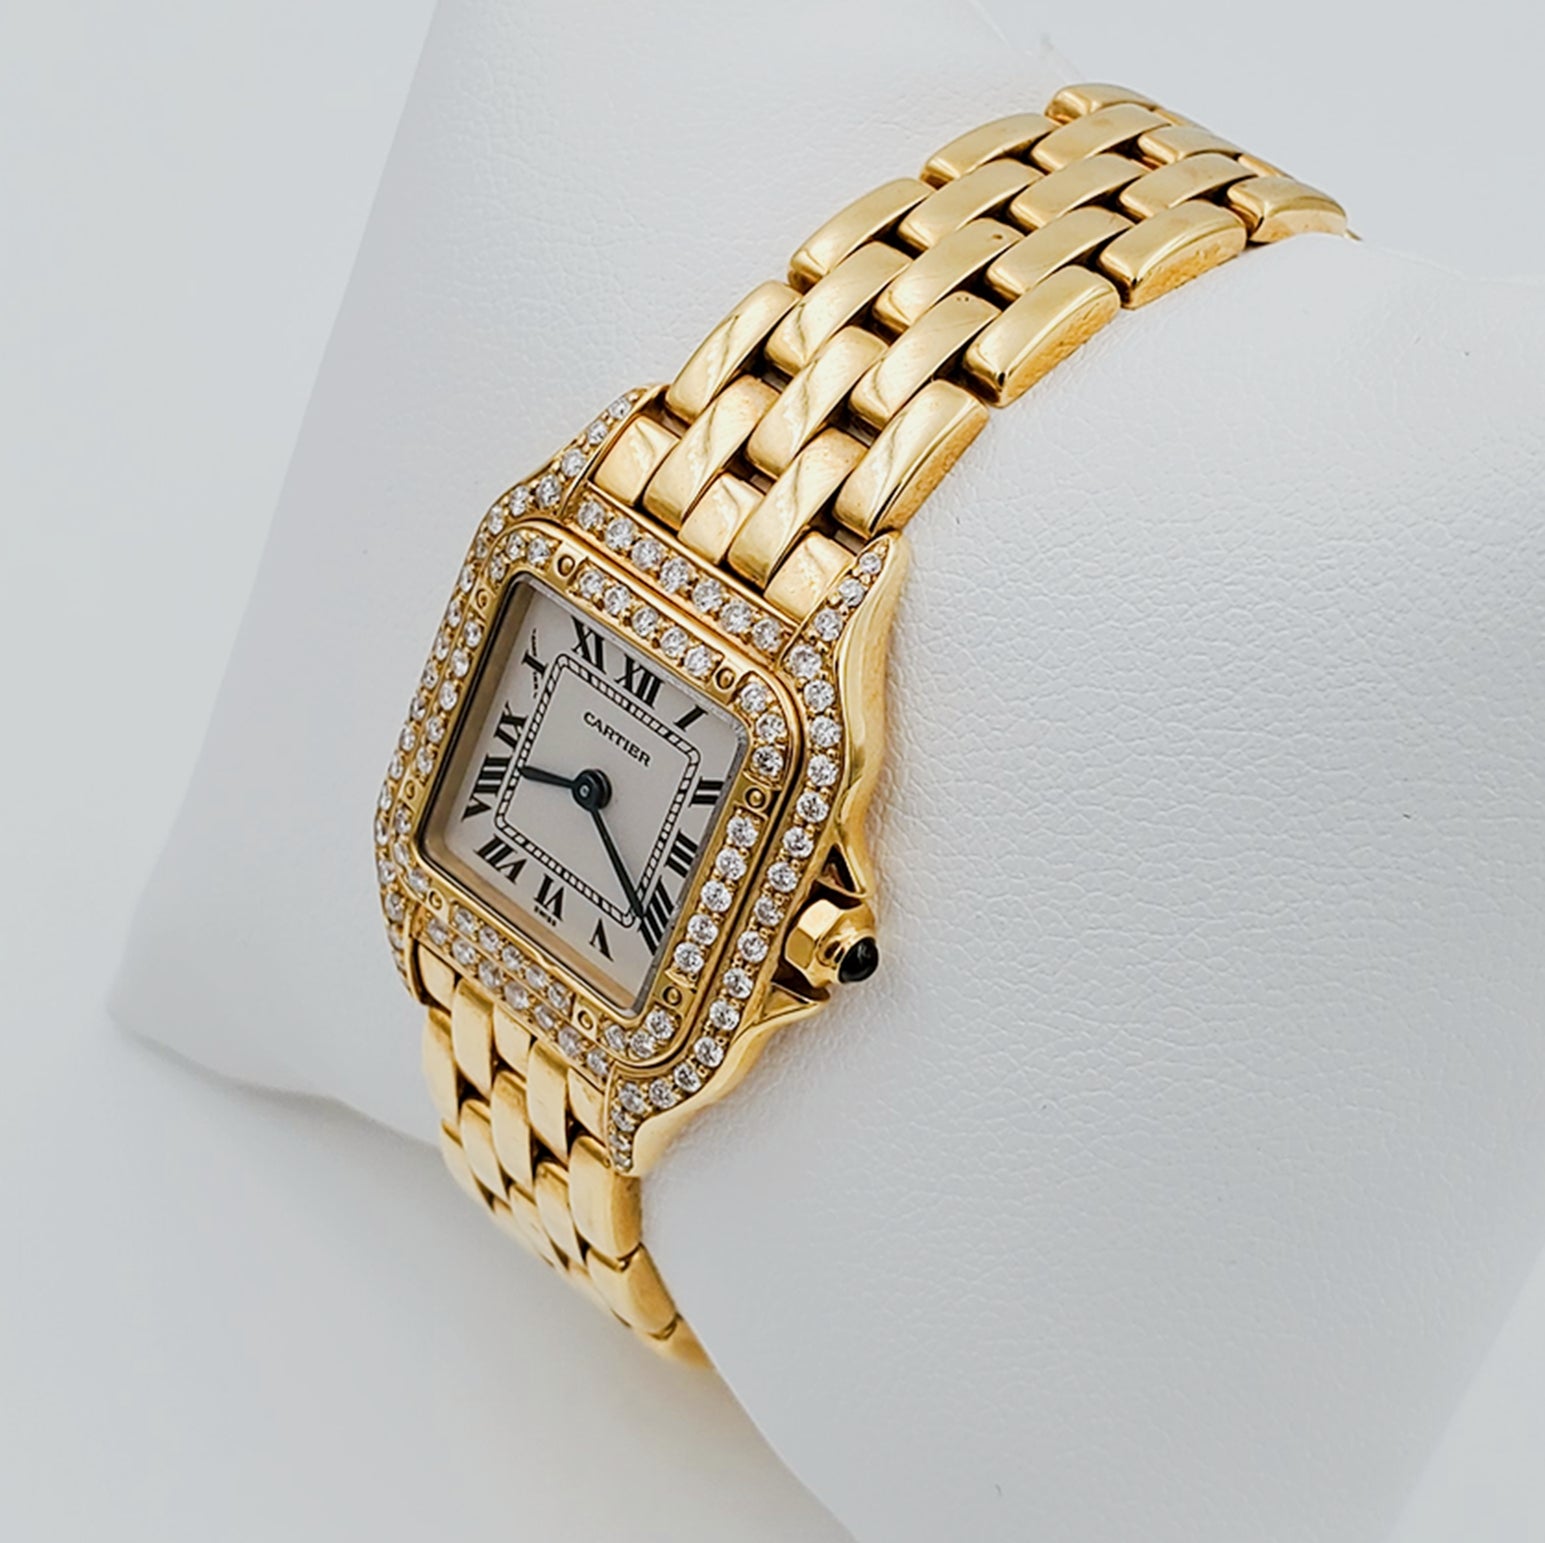 Ladies Small Cartier Santos Polished 18K Solid Yellow Gold Watch with Custom Diamond Bezel. (Pre-Owned)